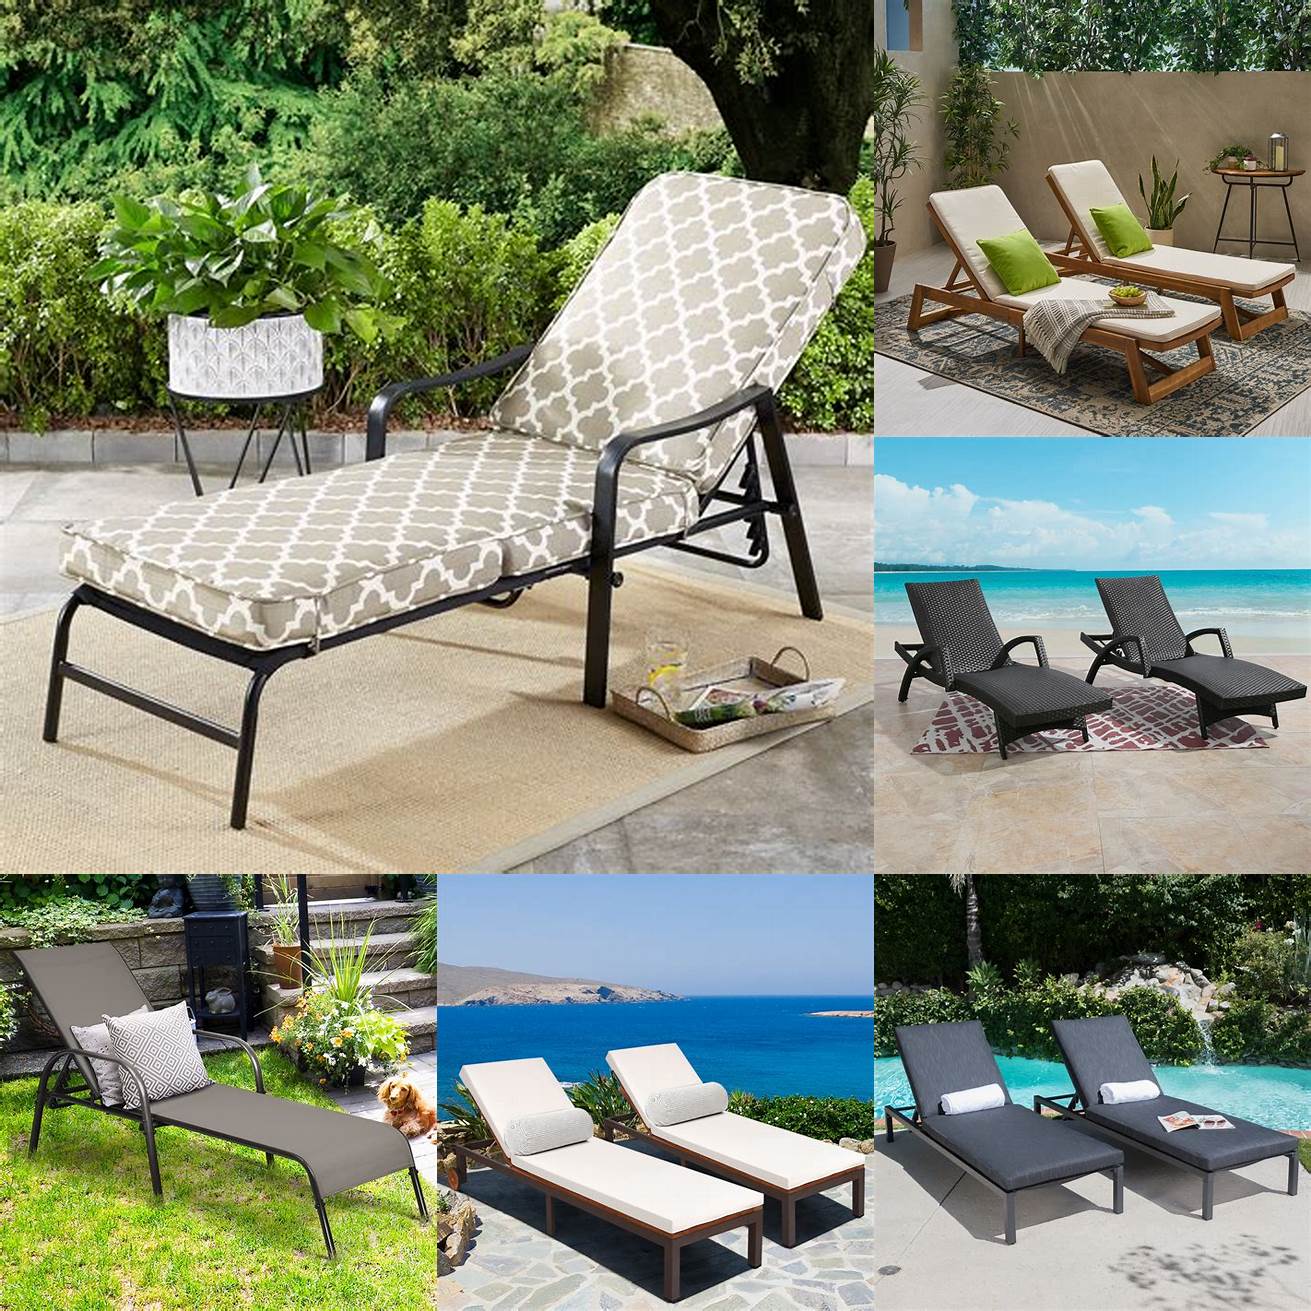 Outdoor Chaise Loungers